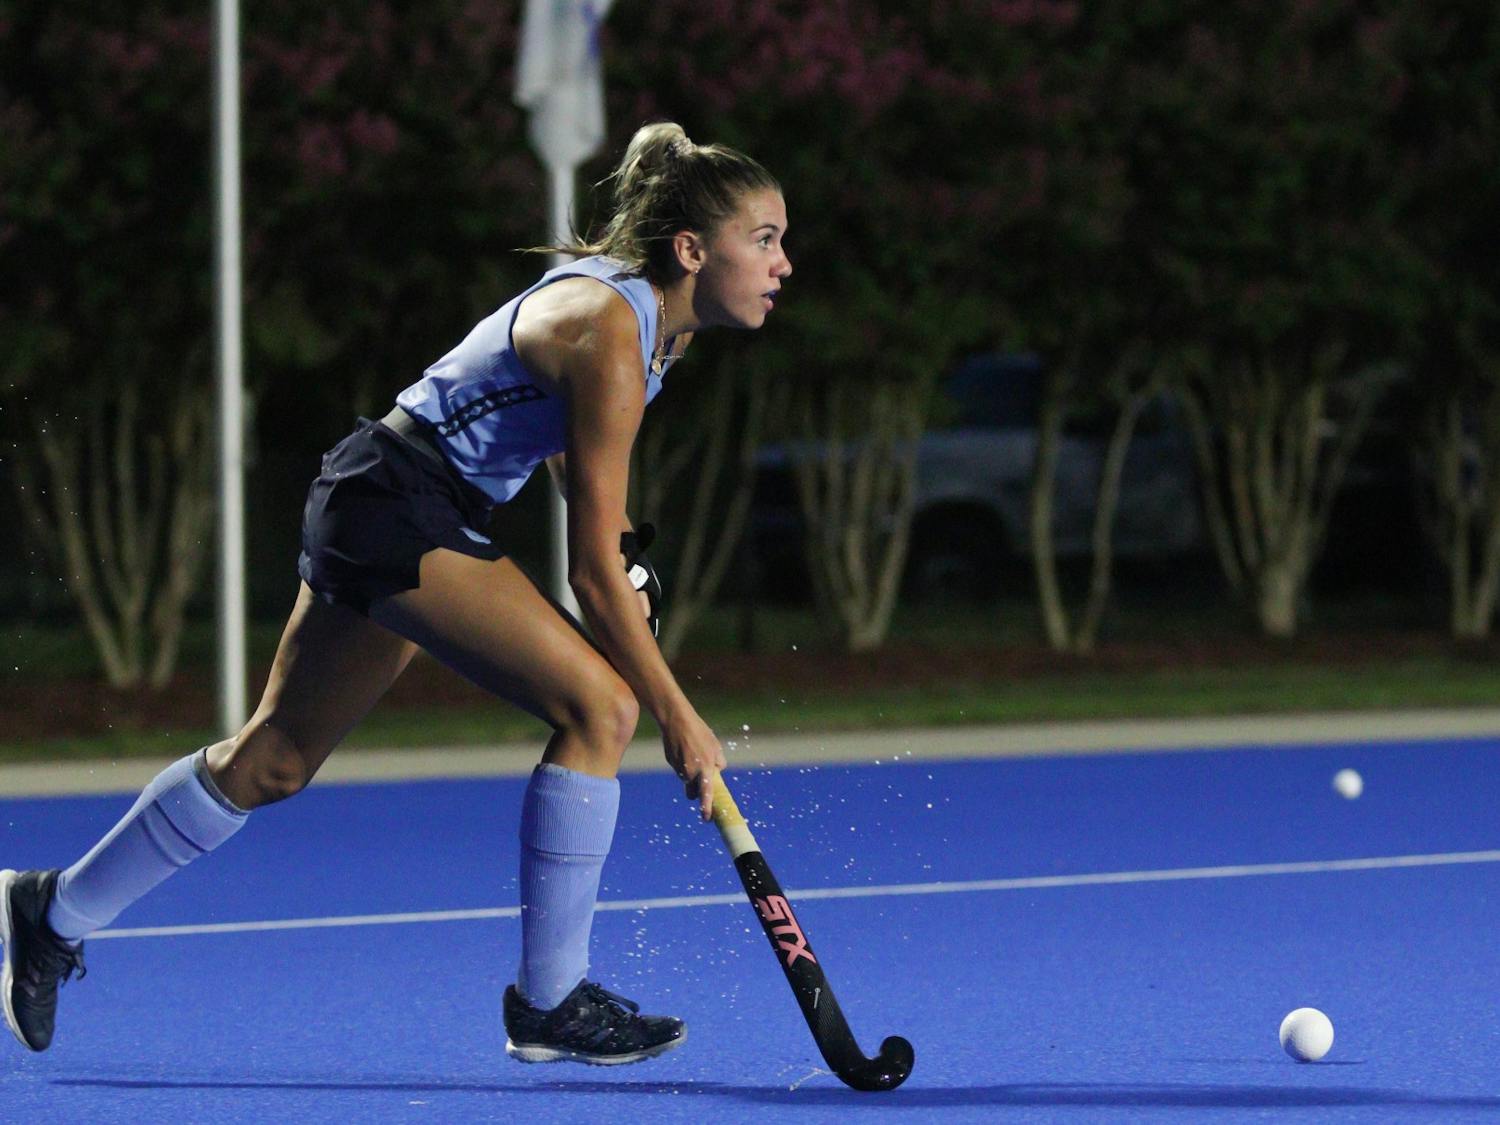 First-year forward Ashley Sessa (3) looks for an open pass. UNC beat Duke 4-1 away on Saturday, Aug. 20, 2022.